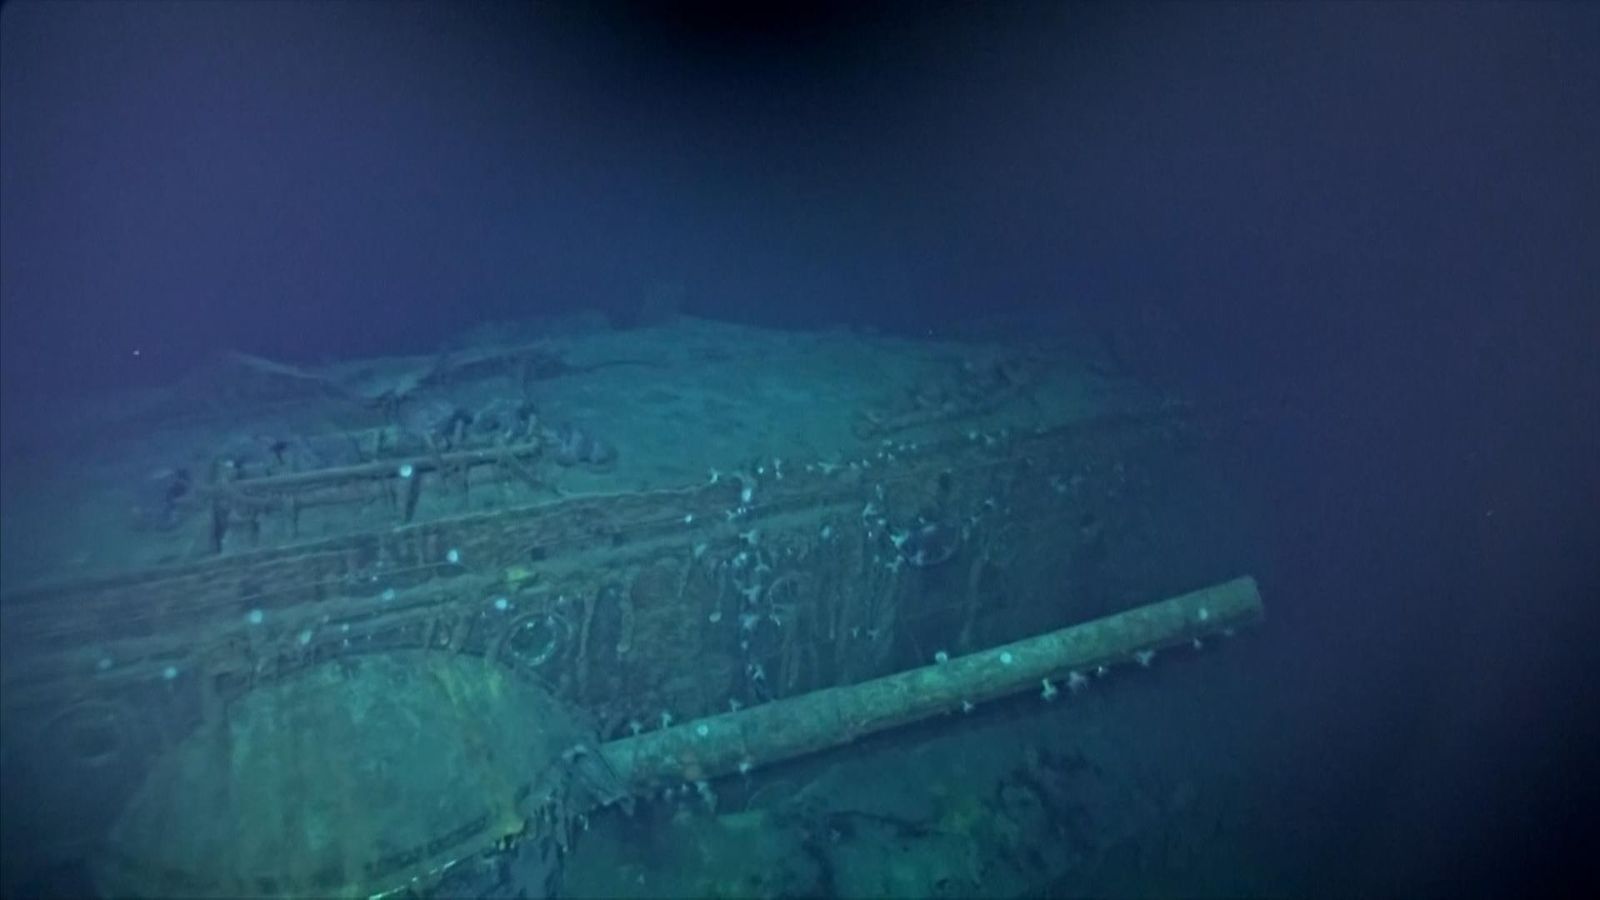 Explorers set out to find lost WWII ships deep under the ocean ...